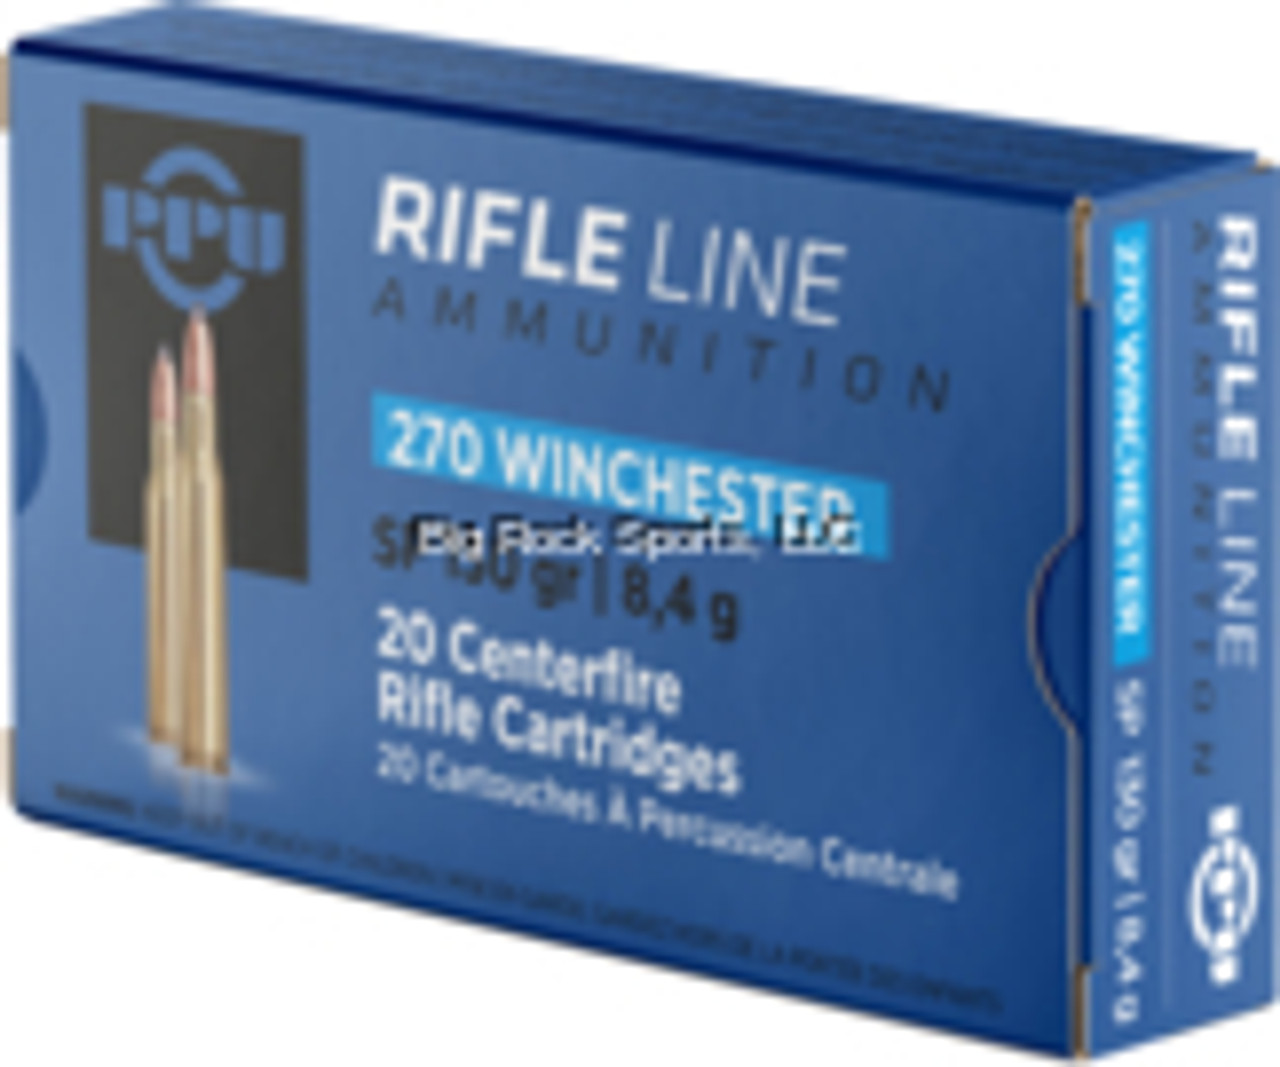 PPU Rifle Ammo 270 WIN SP 130gr, 20 Rounds